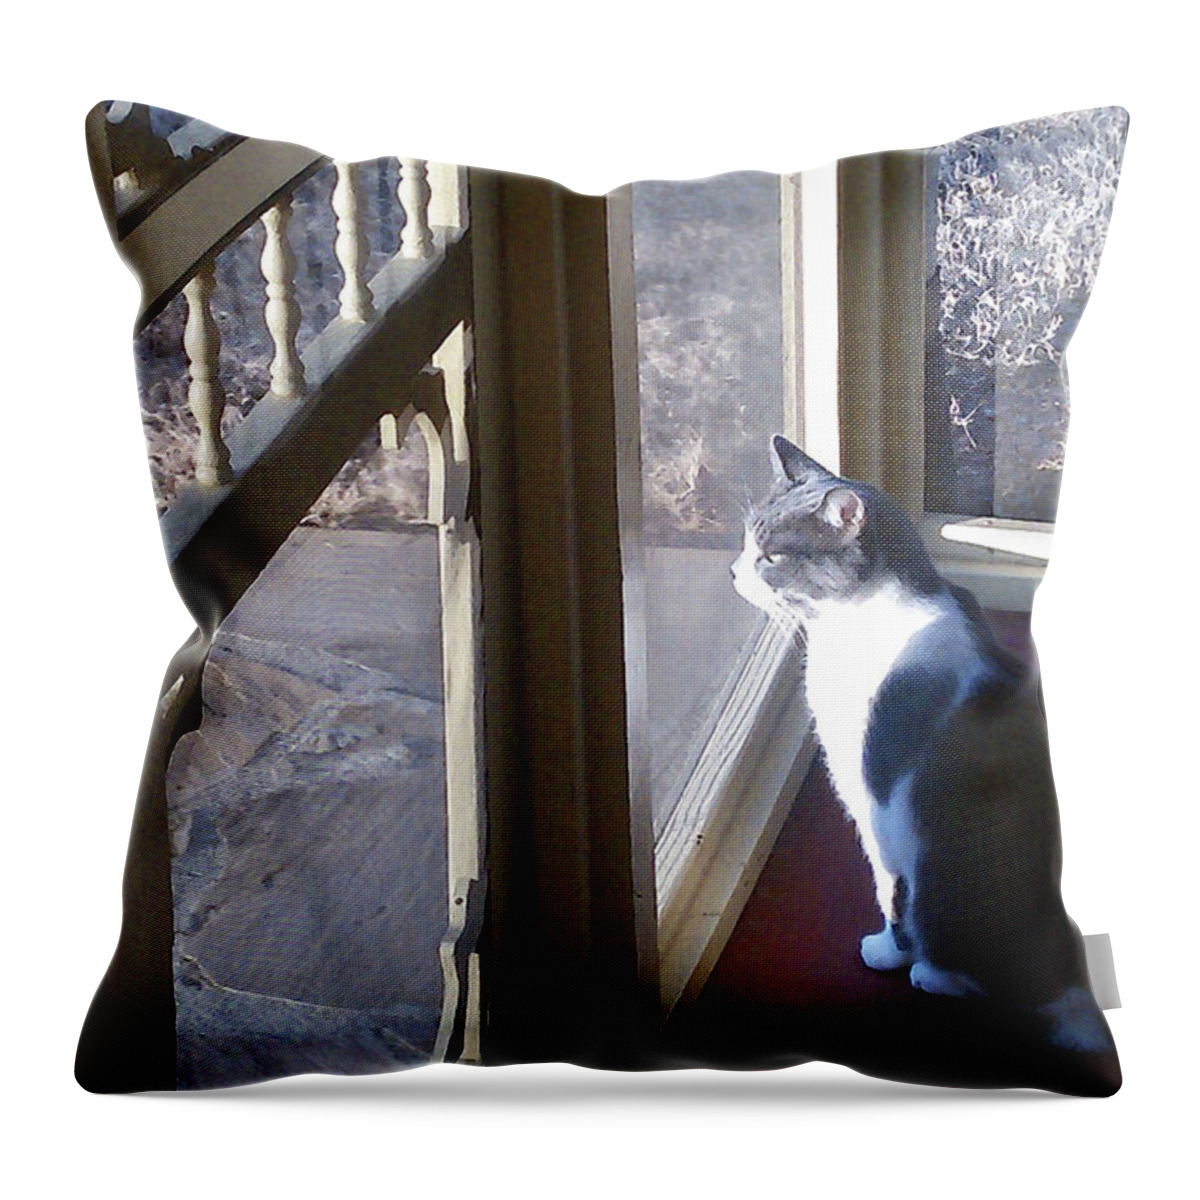 Animal Throw Pillow featuring the mixed media Longing by Sharon Williams Eng